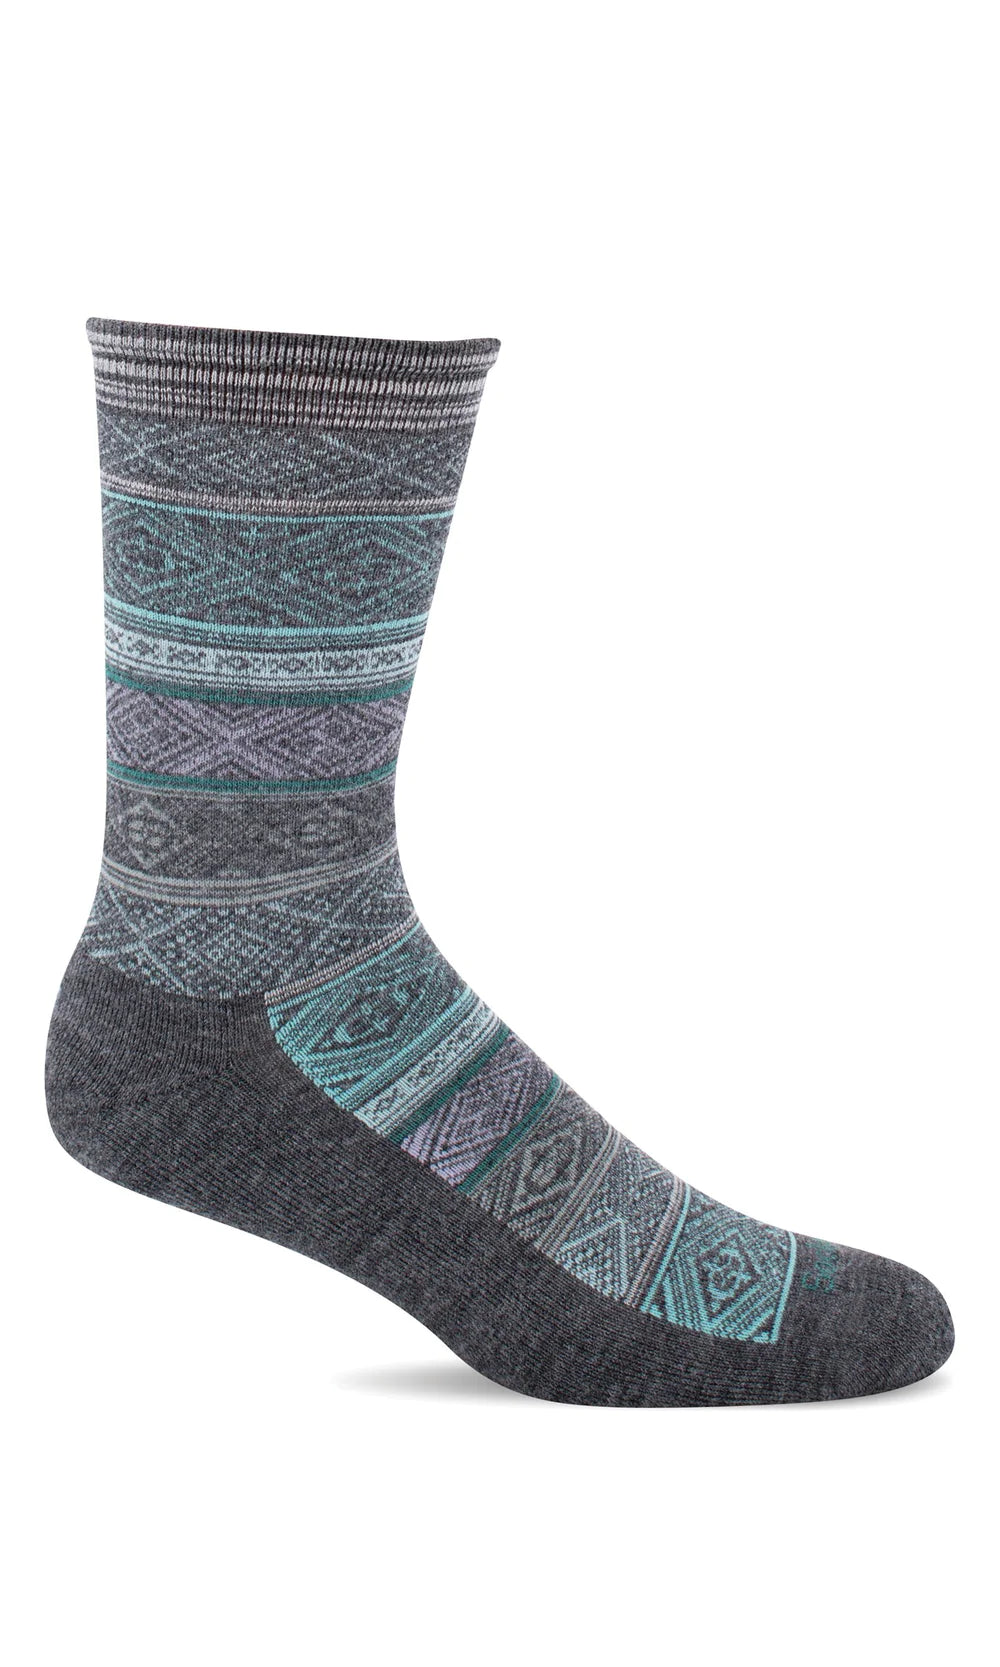 Charcoal and turquoise pattern on a soft top crew sock - The Sockery